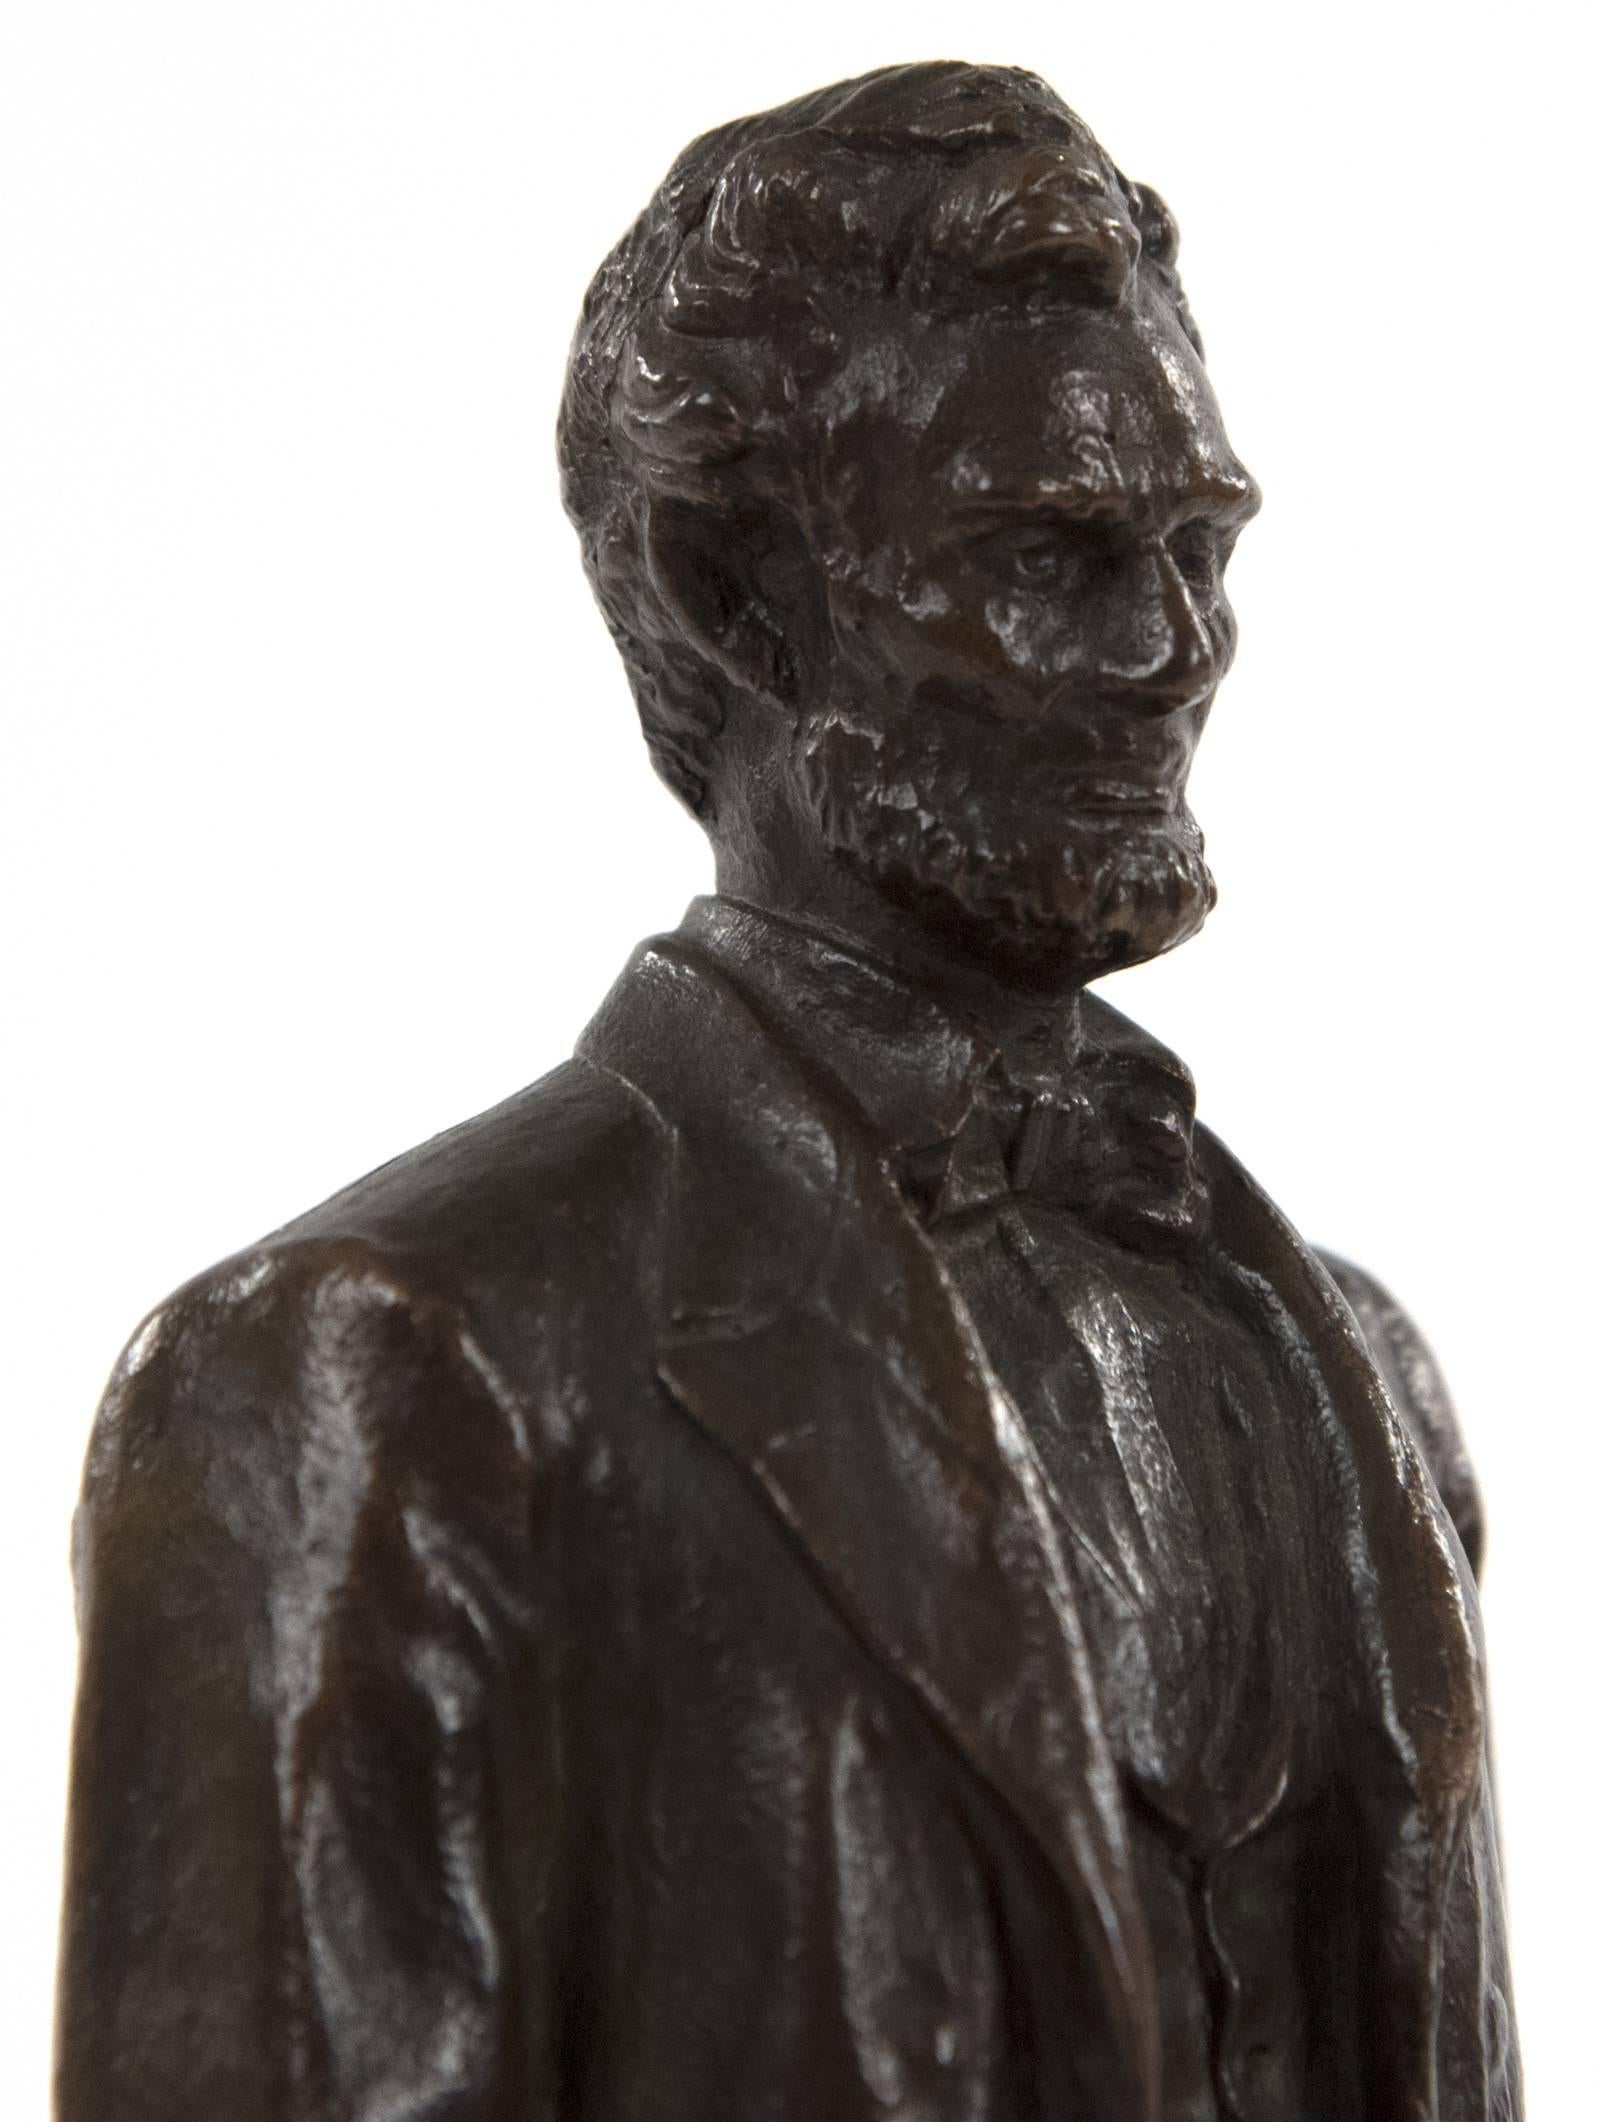 This bronze statuette of Lincoln, shown holding the emancipation proclamation in his right hand, by American sculptor George E Bissell (1839-1920), is modelled after the life-size monument element on the Scottish-American Soldiers Monument in